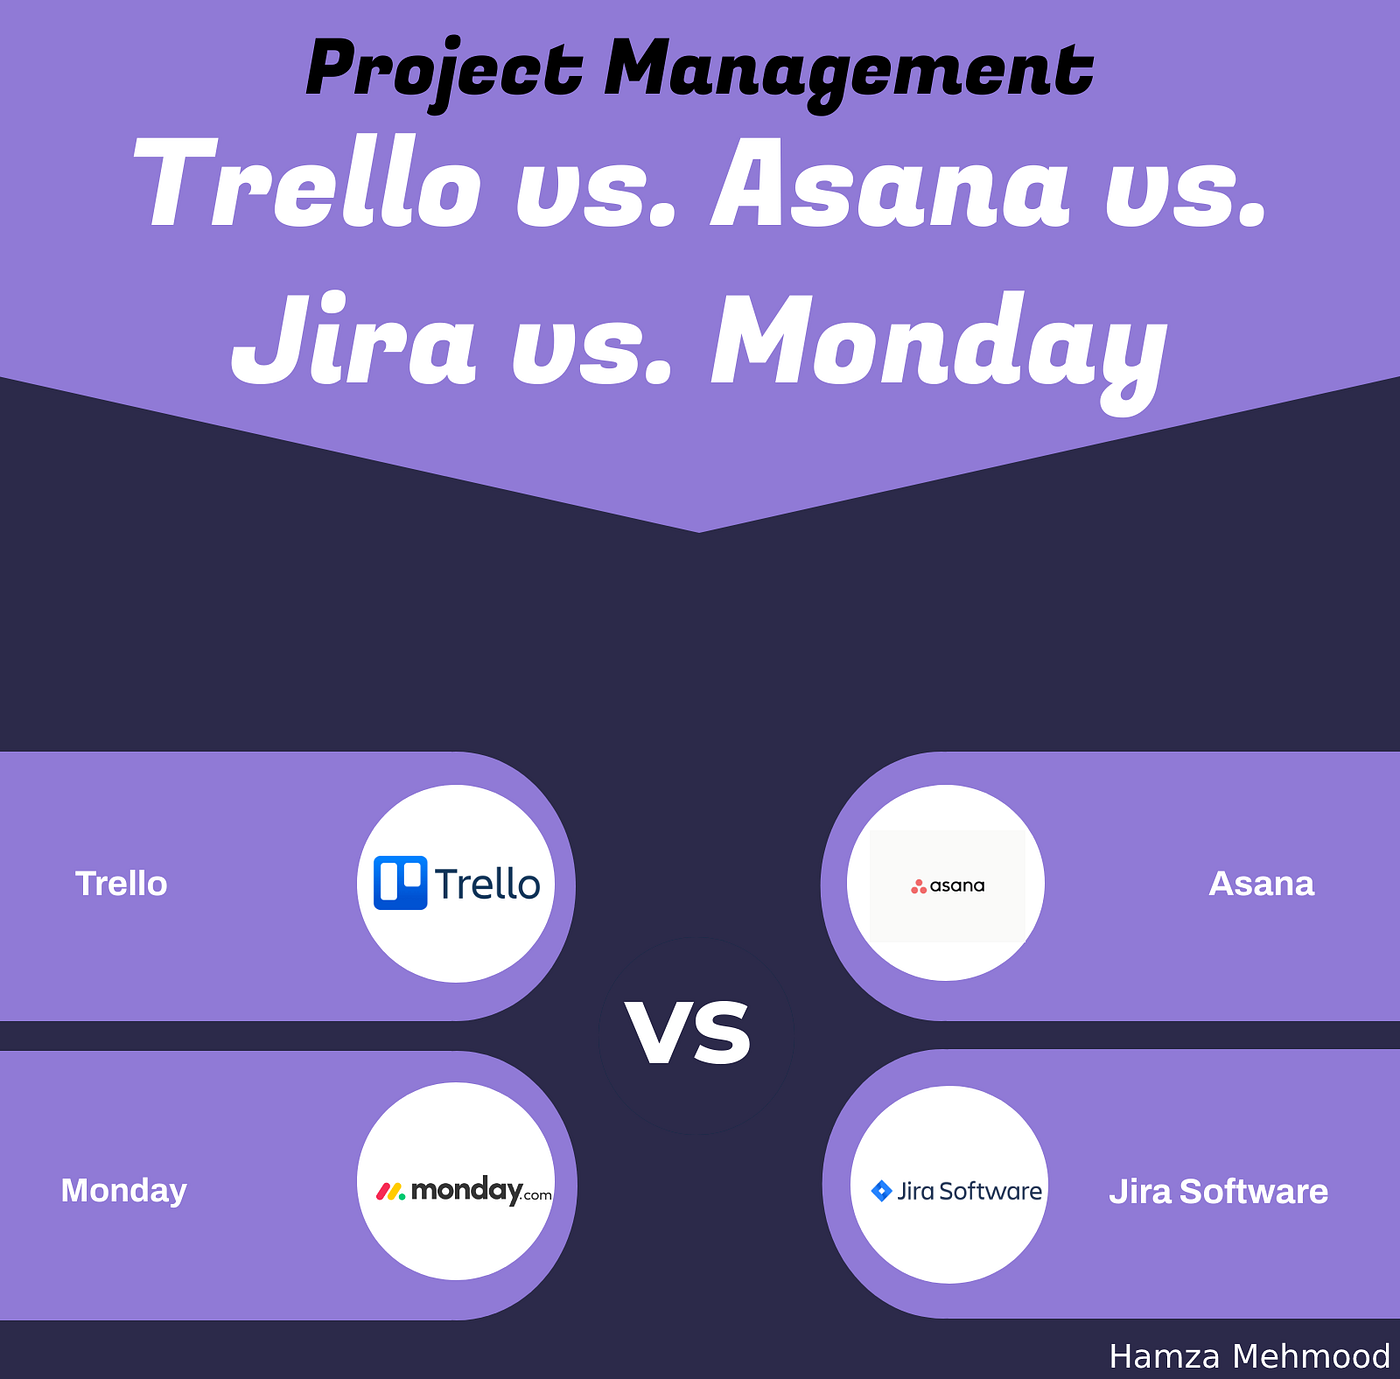 Jira vs Trello: Which is a Better Project Management Tool